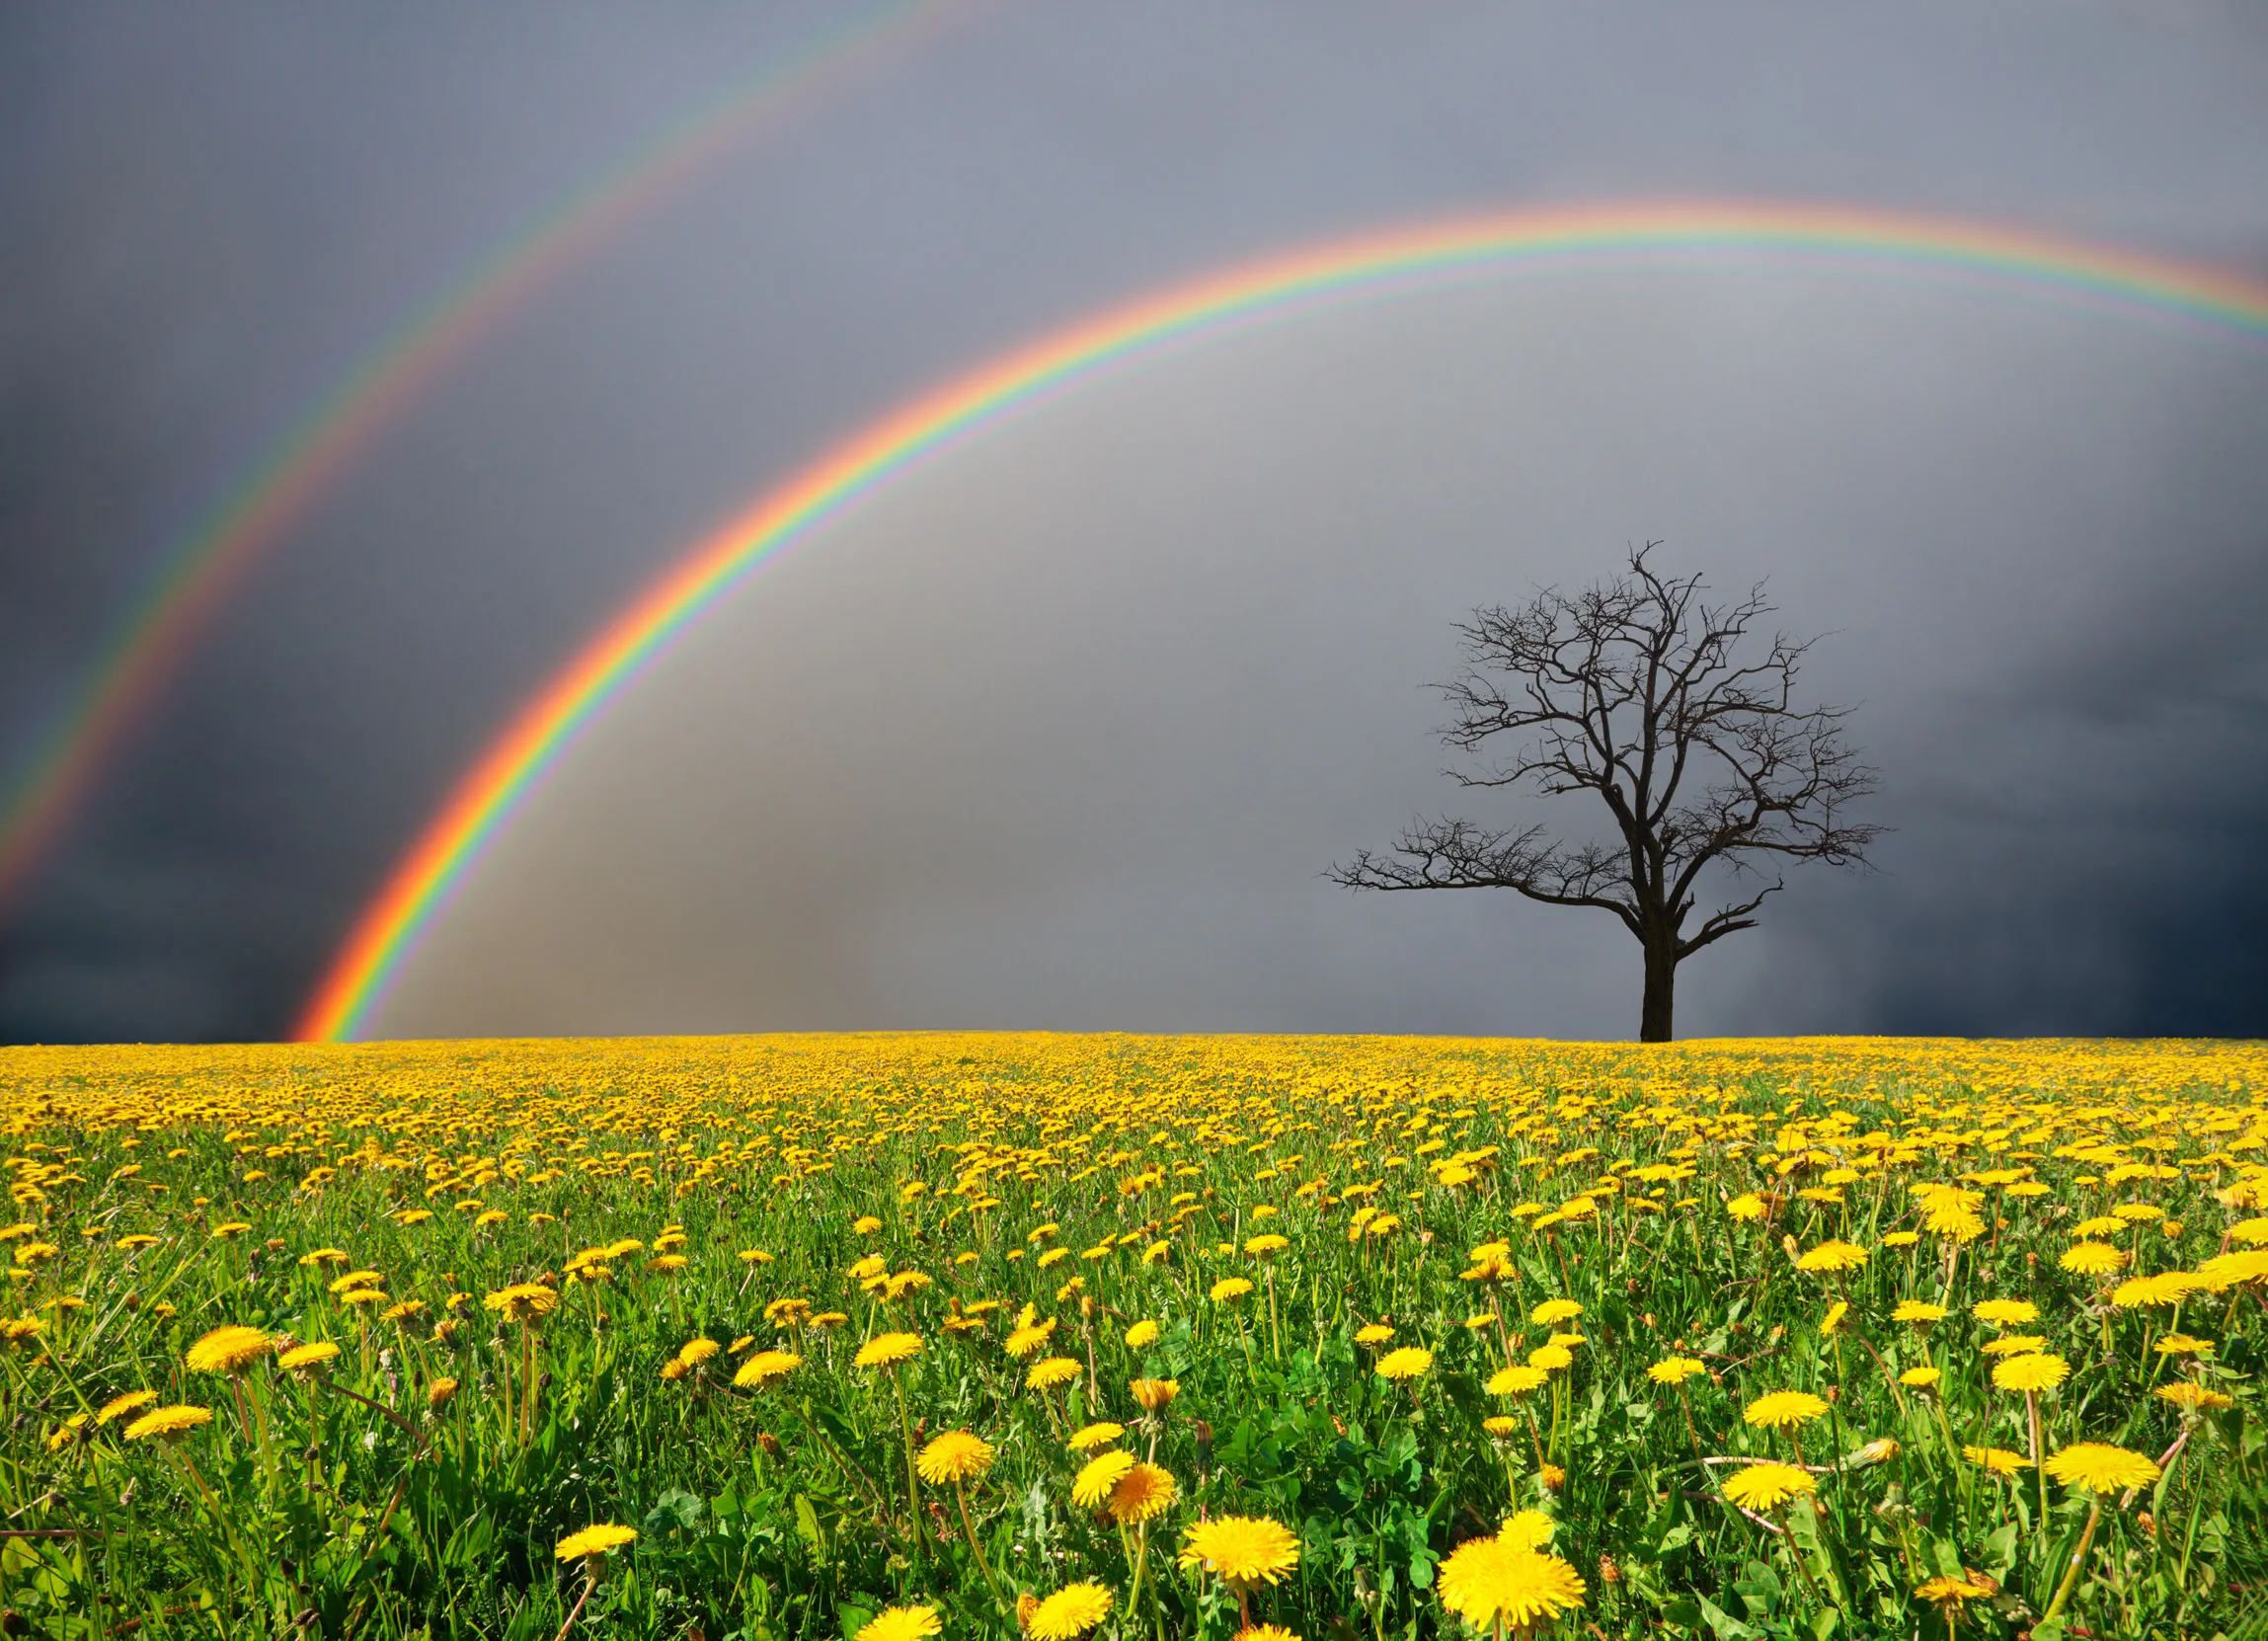 An overview of a meadow with yellow flowers with a tree in the background, against a dark rainy sky and a rainbow.